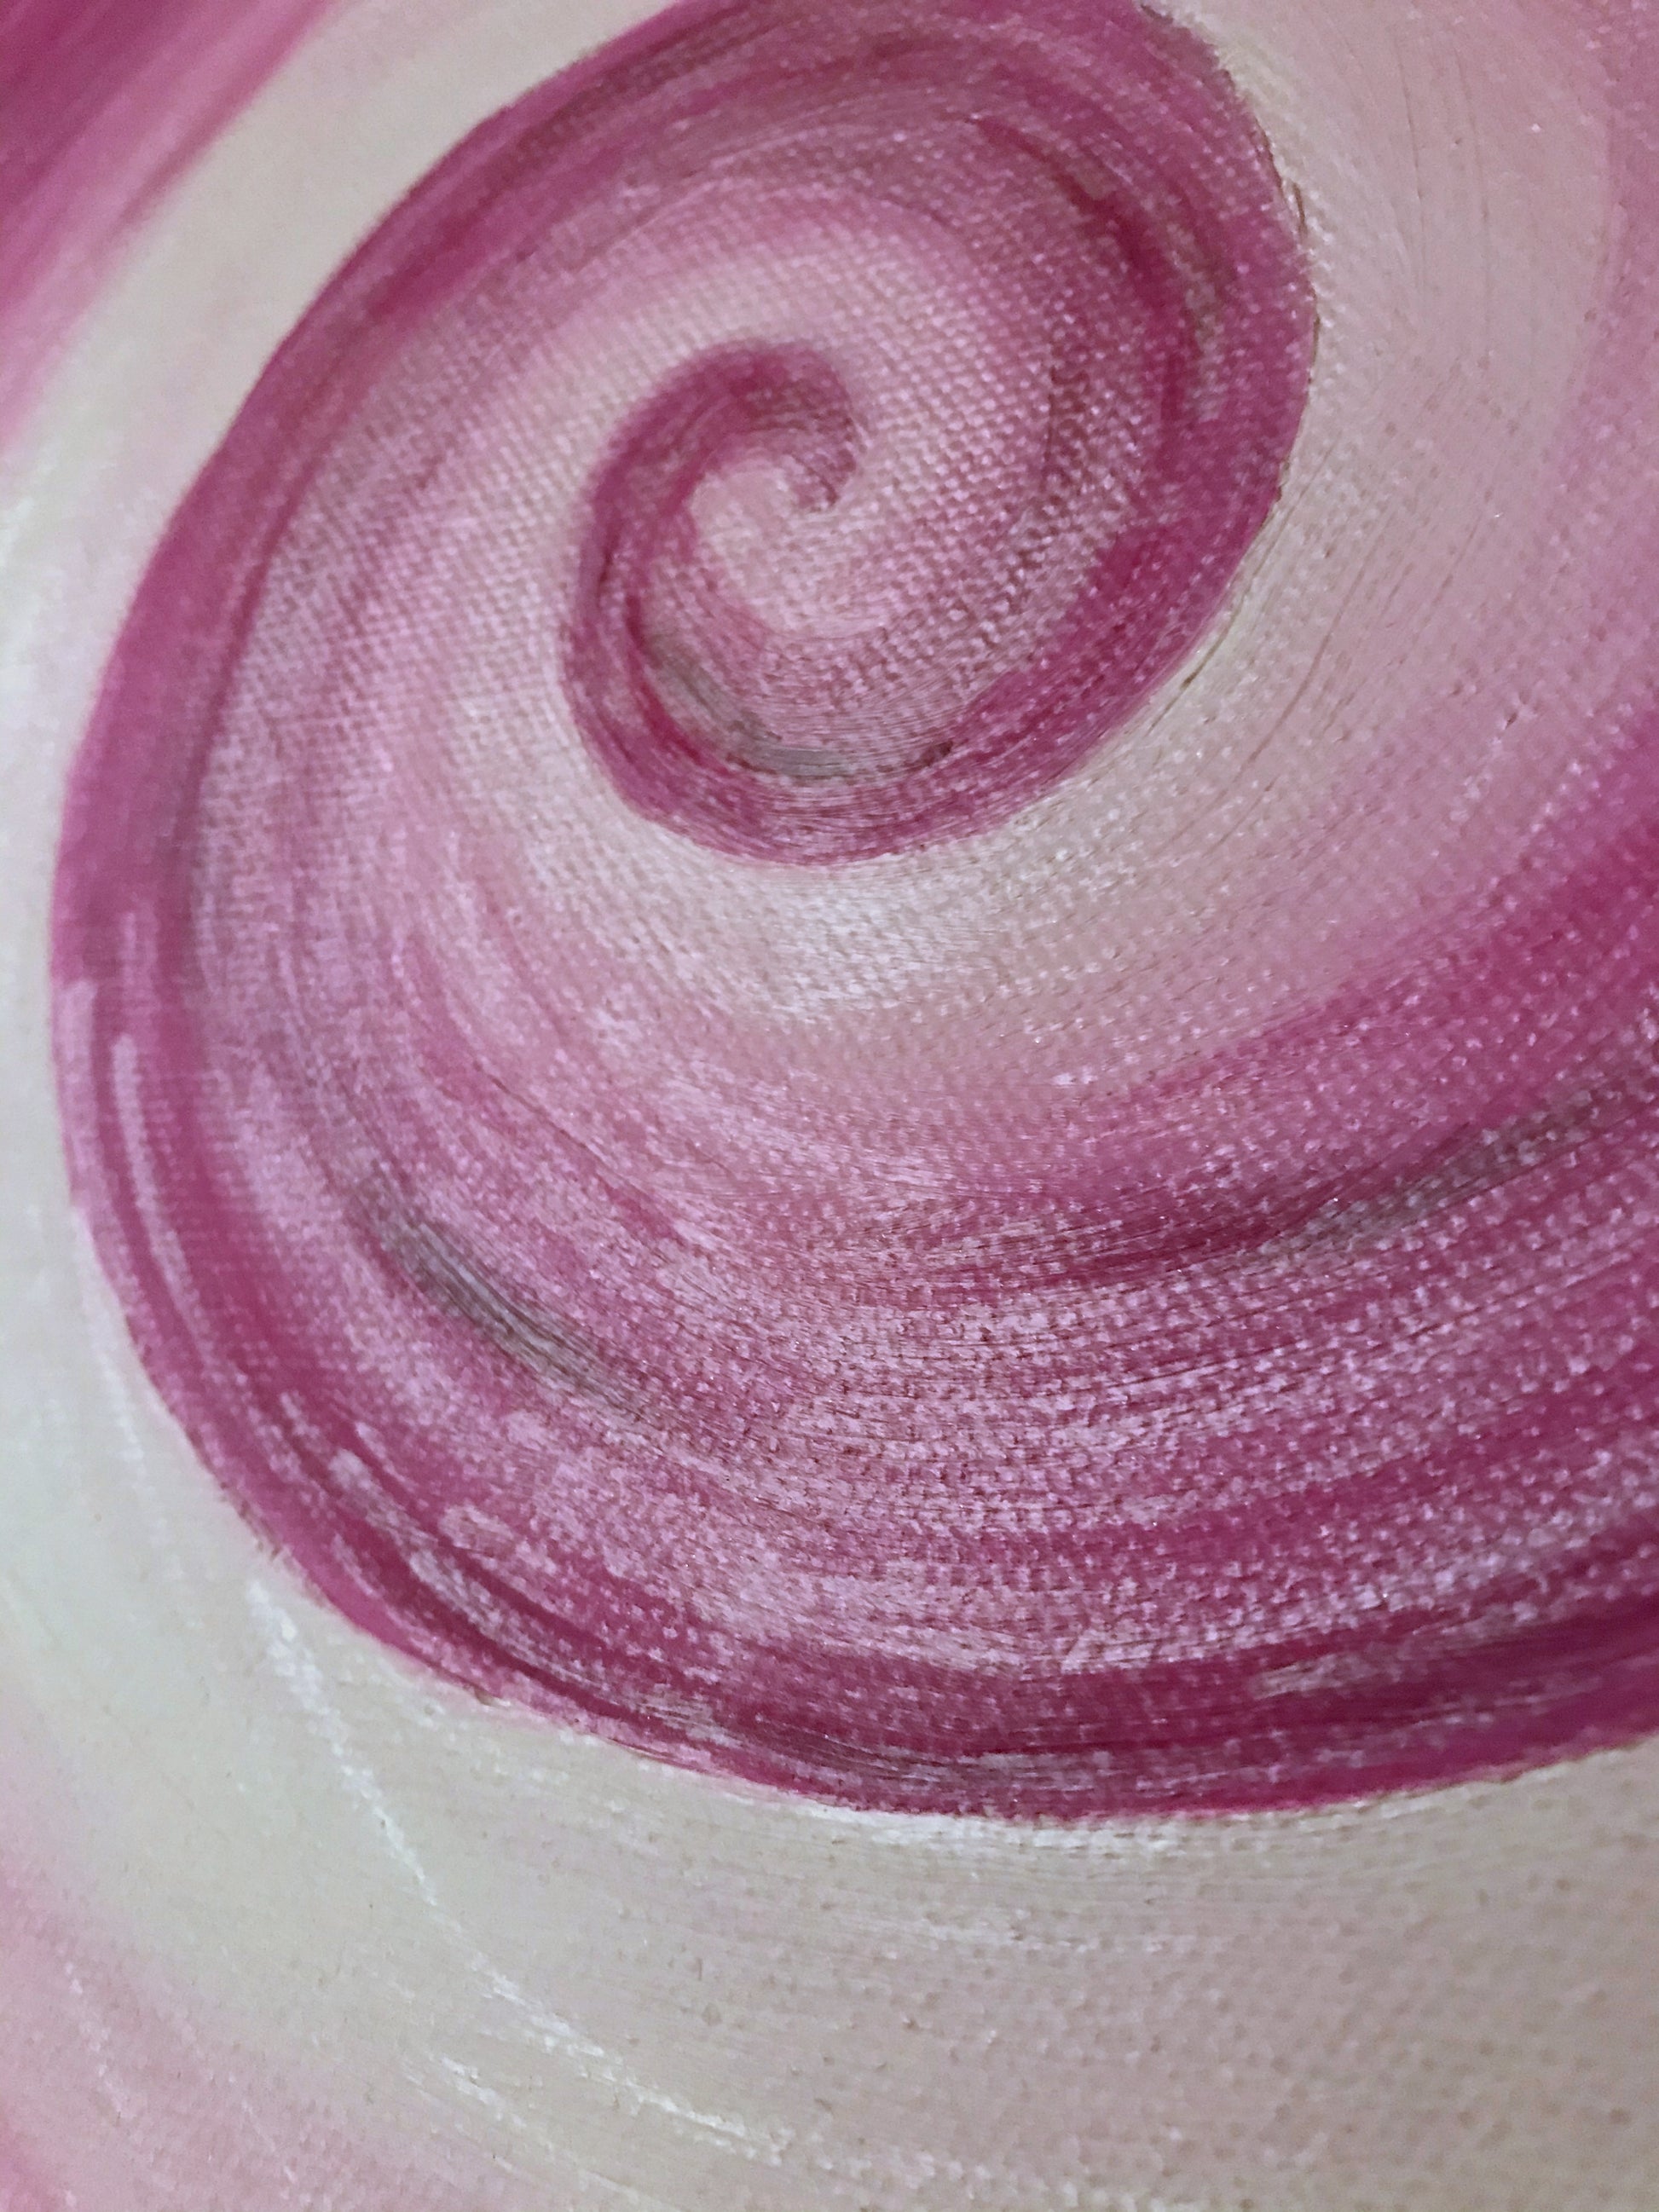 detail shot.original 2 canvas panel large oil abstract painting with mica powder by Hungarian visionary artist Marianna Mills. Total wall space 43 inches x 38 inches. Title is Thinking it over and over again.. is a beautiful visionary fine art featuring spirals in pink, soft blue and white colors in an ombre effect with shimmering, sparkling mica powder, this is silver, indigo and iridescent give a desired effect to this amazing artwork. No need framing, ready to hang on your wall.